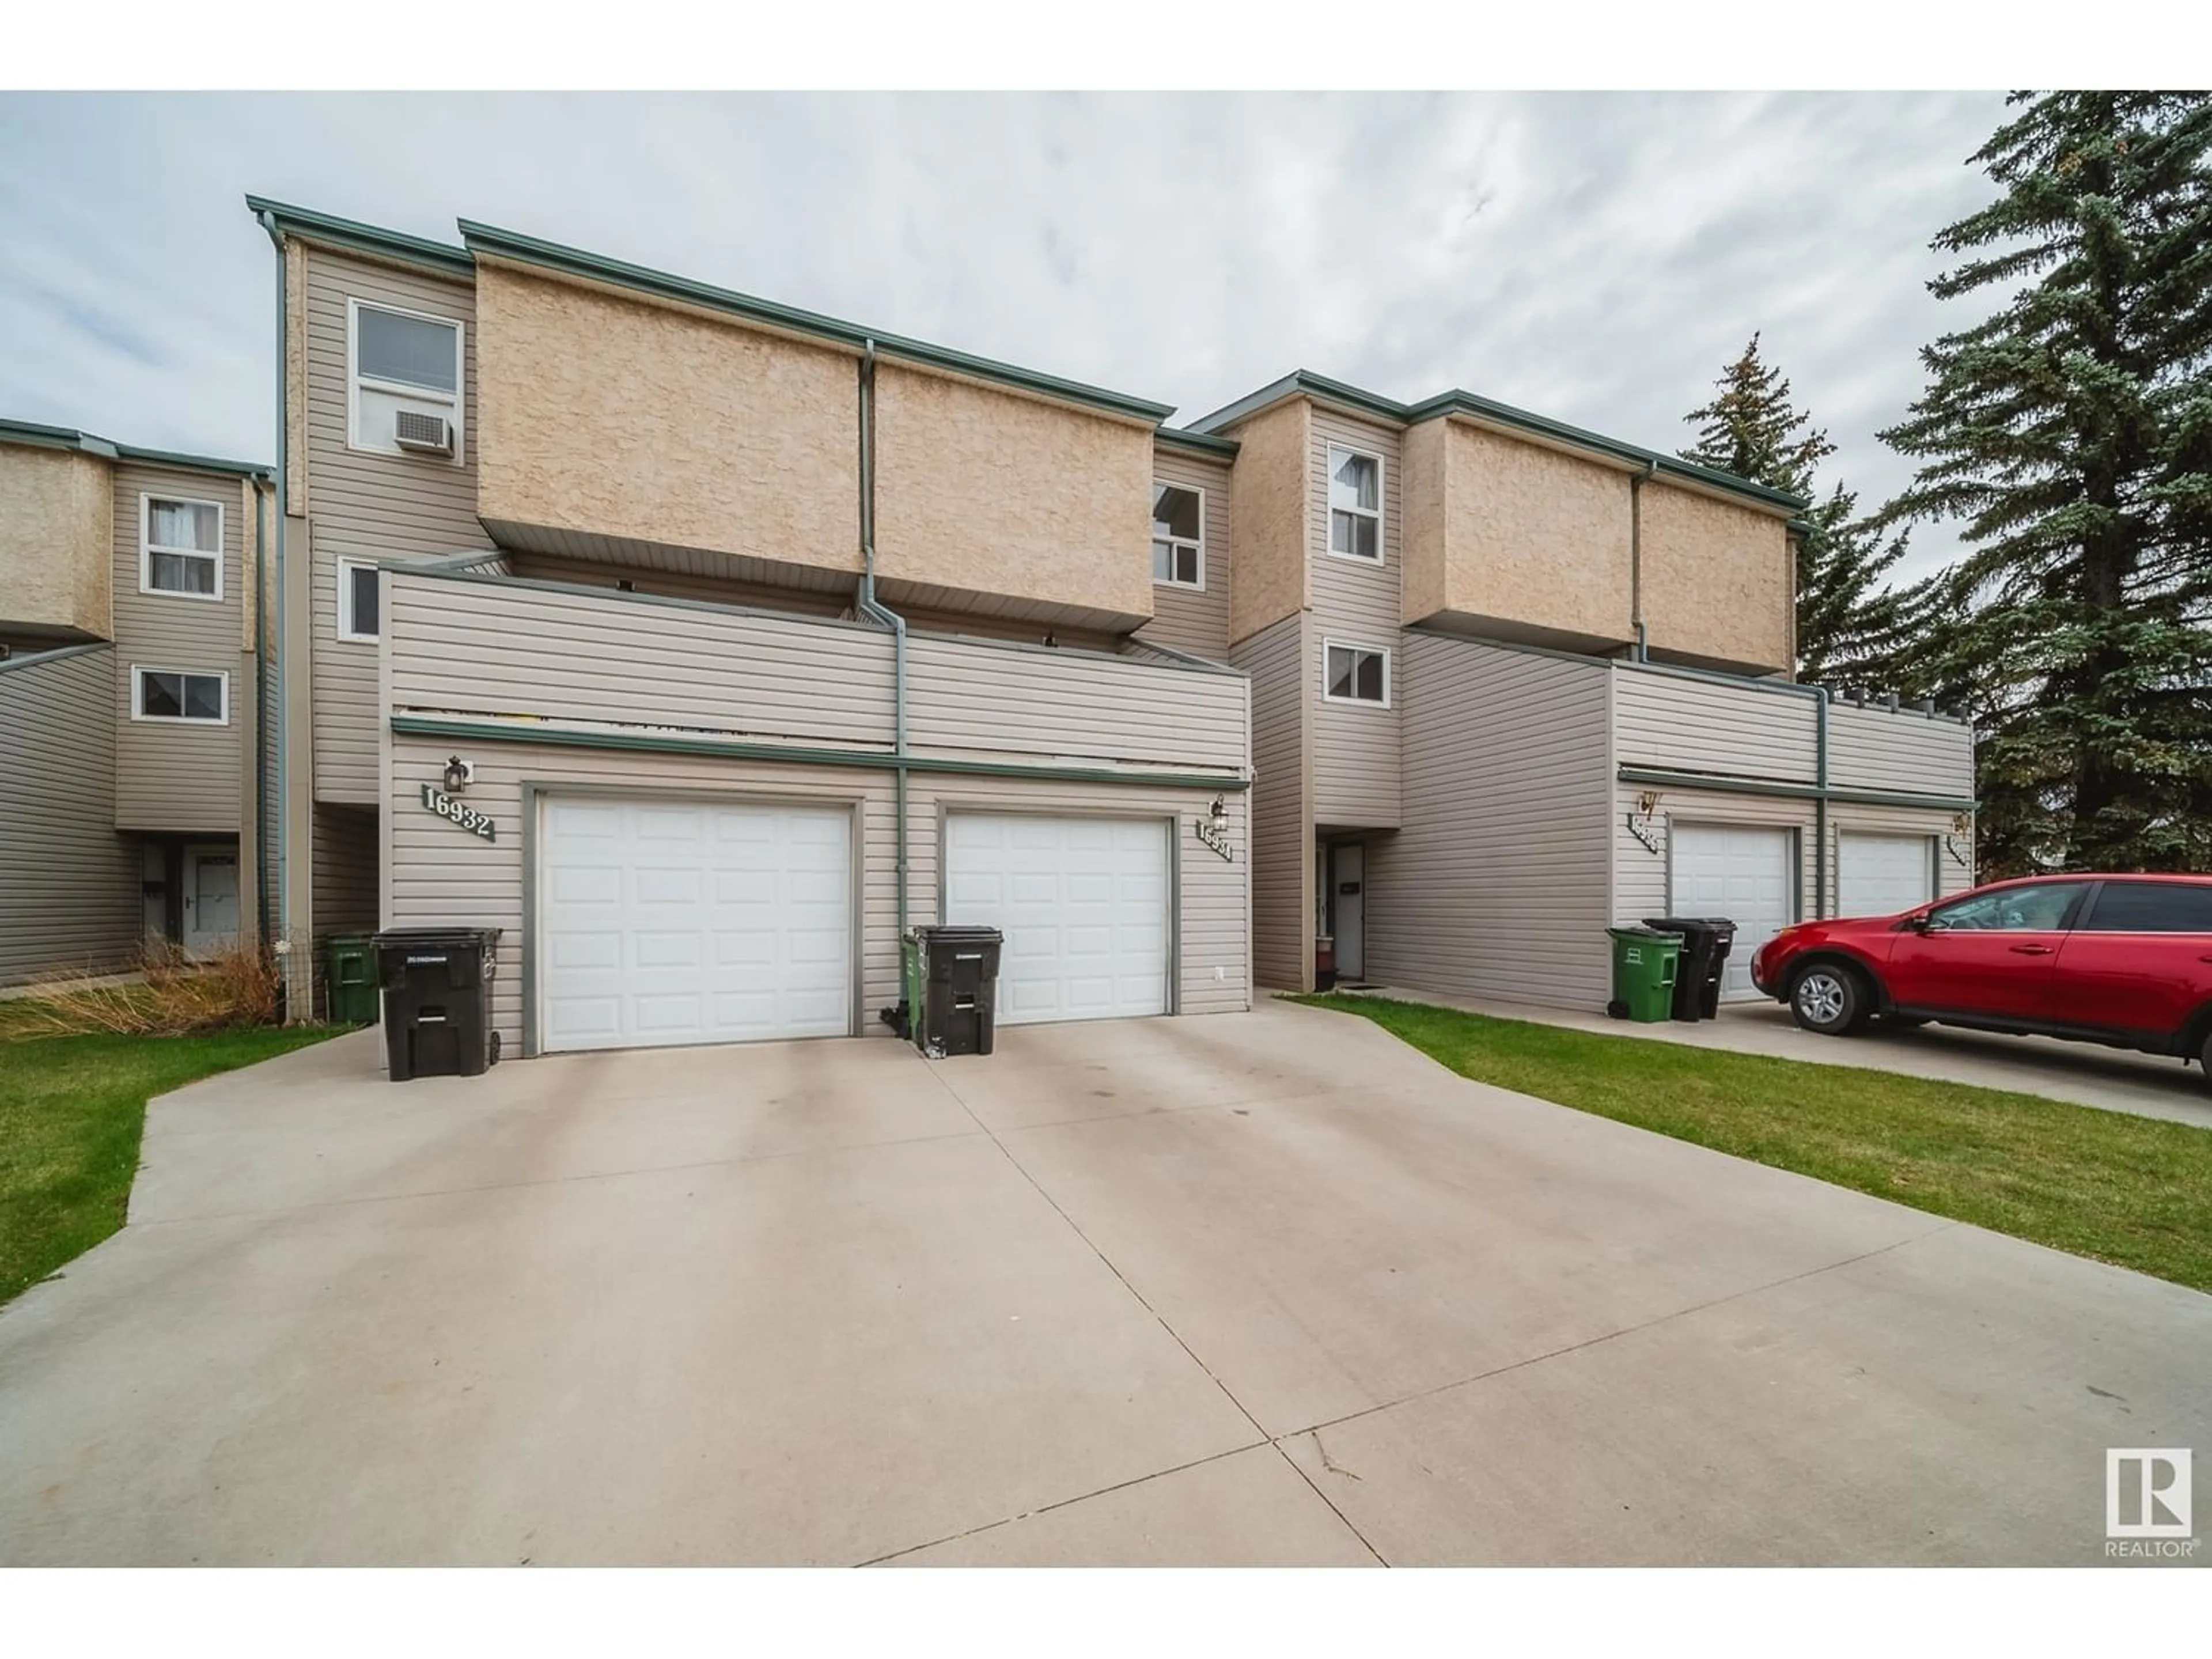 A pic from exterior of the house or condo for 16934 109 ST NW, Edmonton Alberta T5X2J3